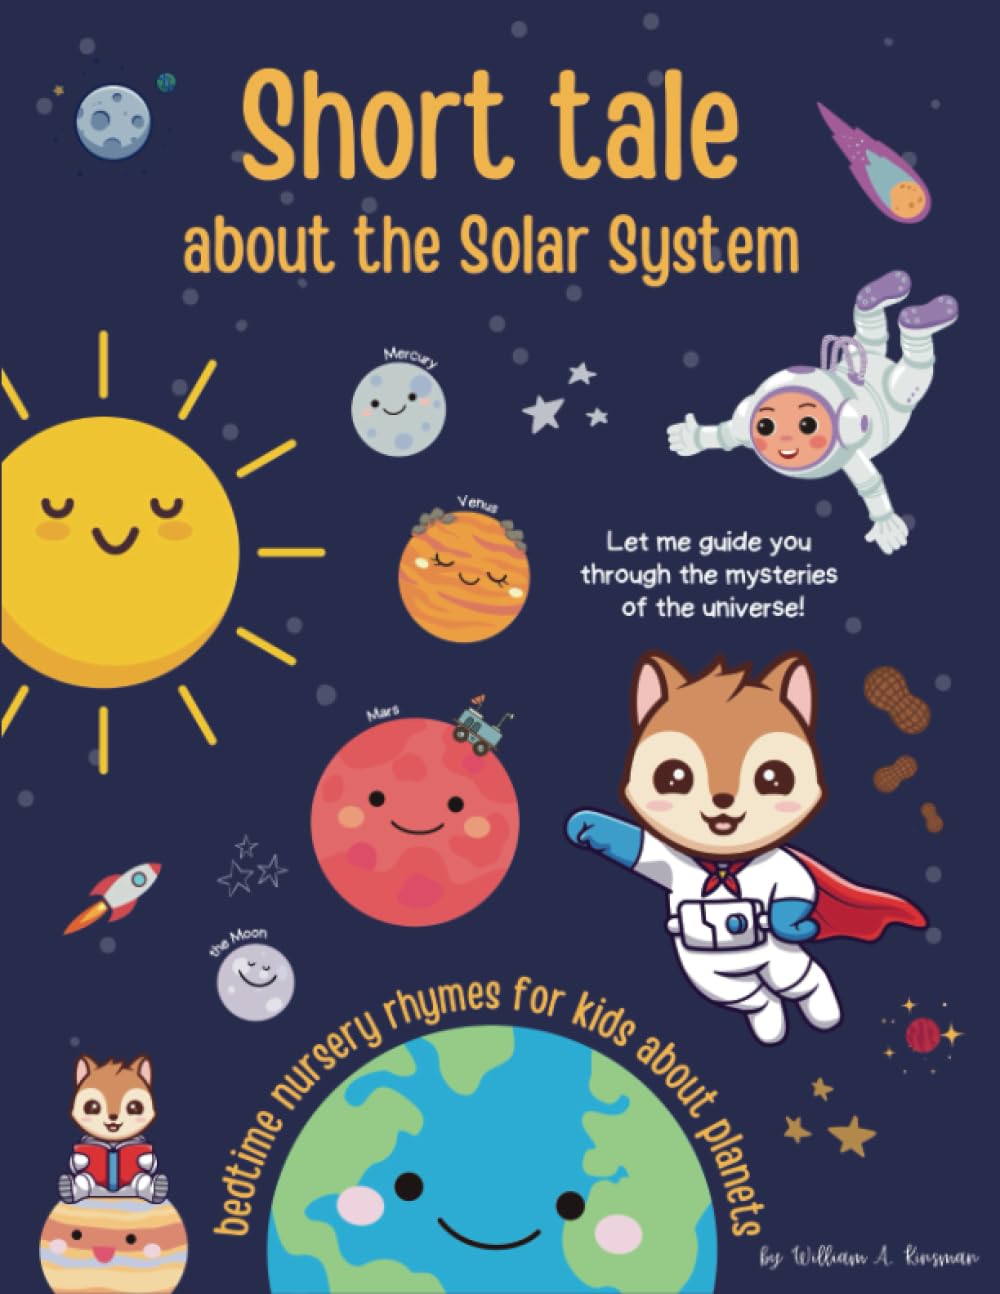 Short Tale About the Solar System - Bedtime Nursery Rhymes Book for Kids About Planets, Space and Universe, from Sun, through Earth to Pluto: ... of Space Adventures for Young Explorers)